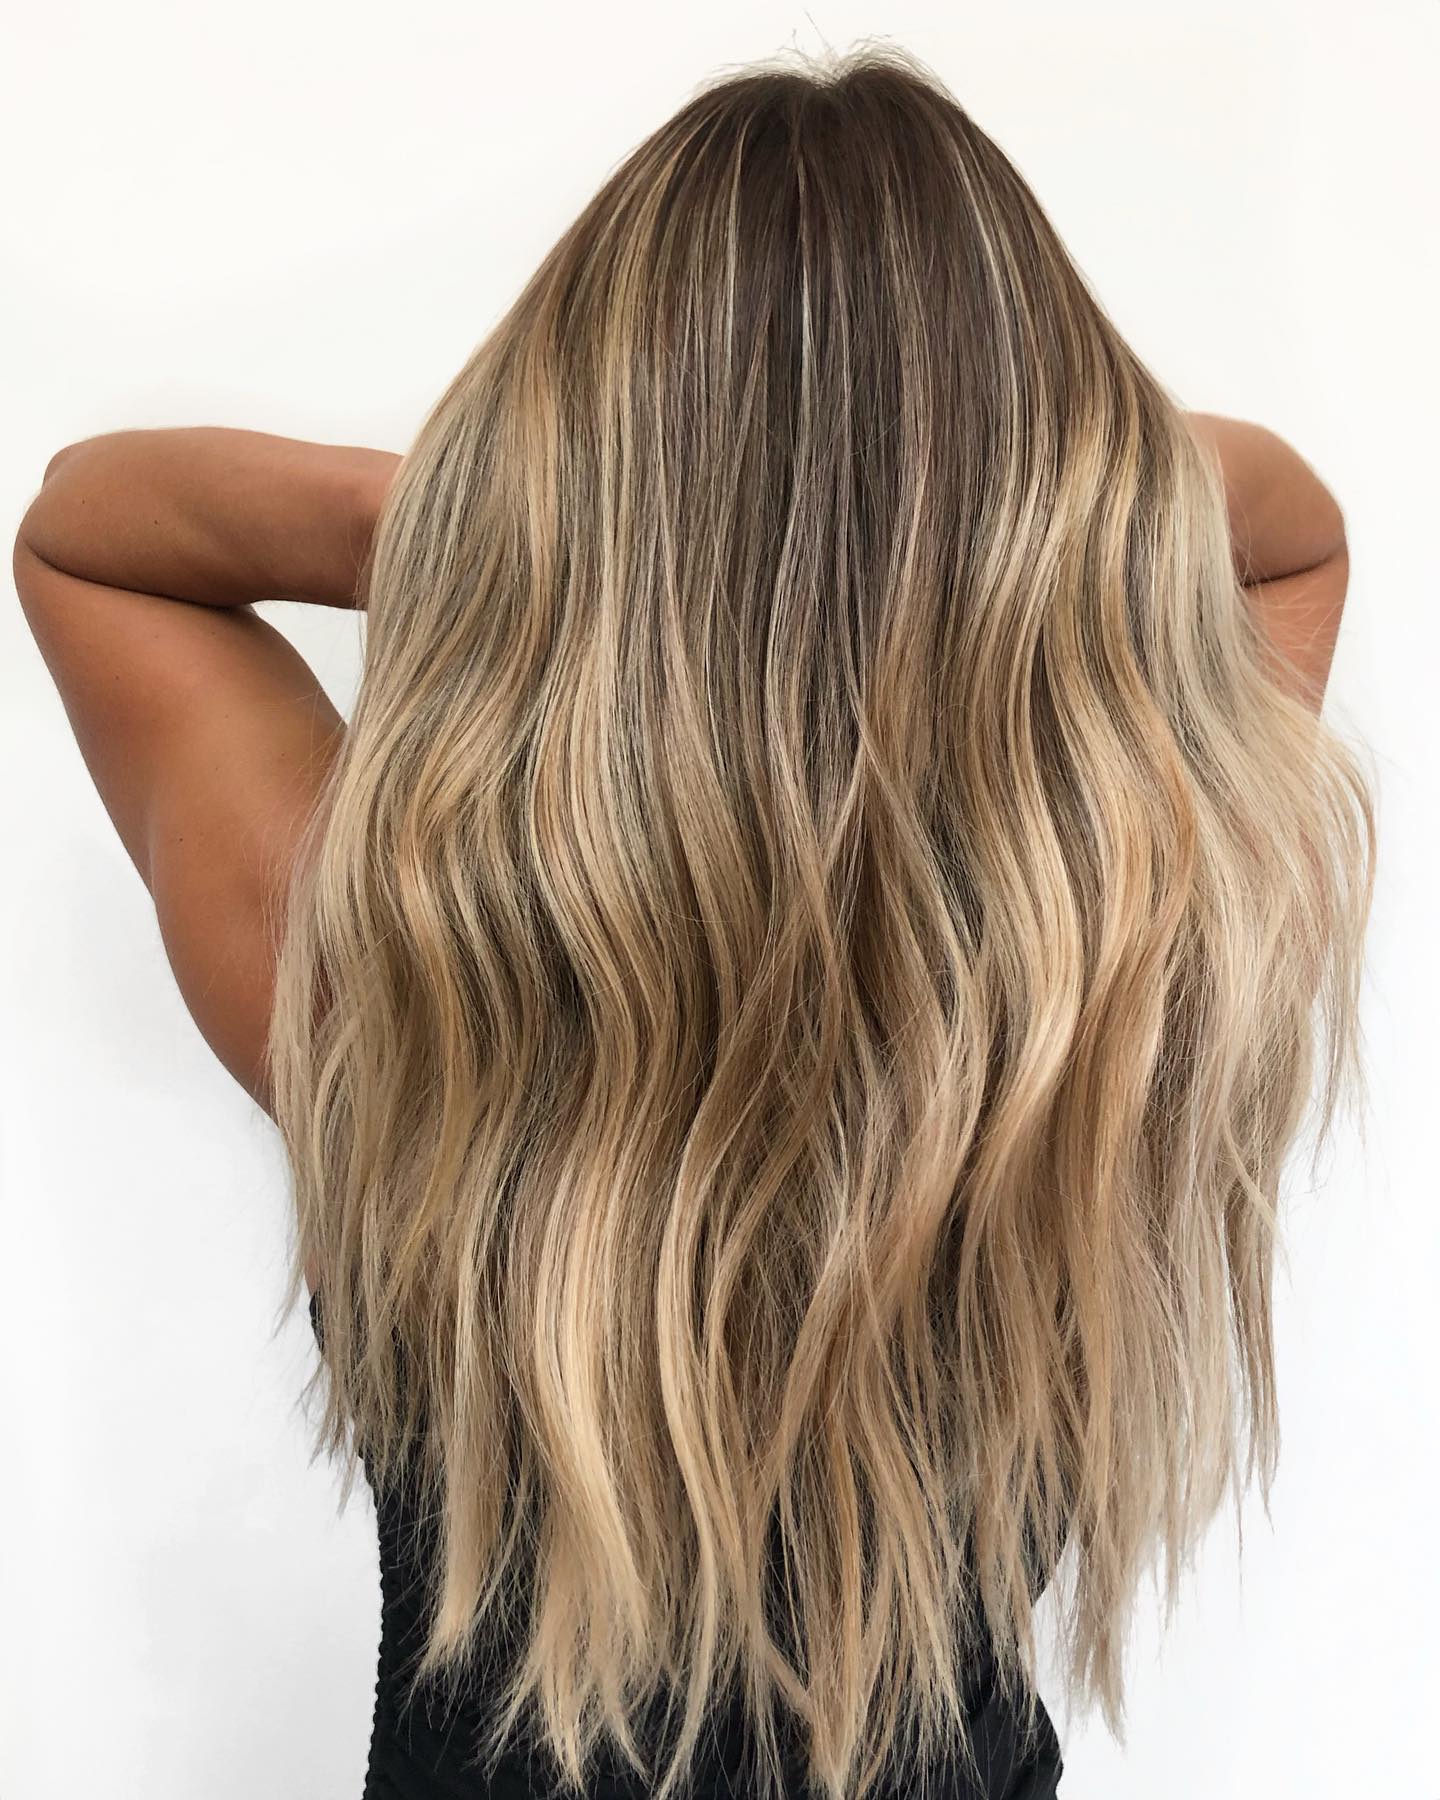 30 Golden Blonde Hair Inspirations for You to Shine Out Throughout 2023